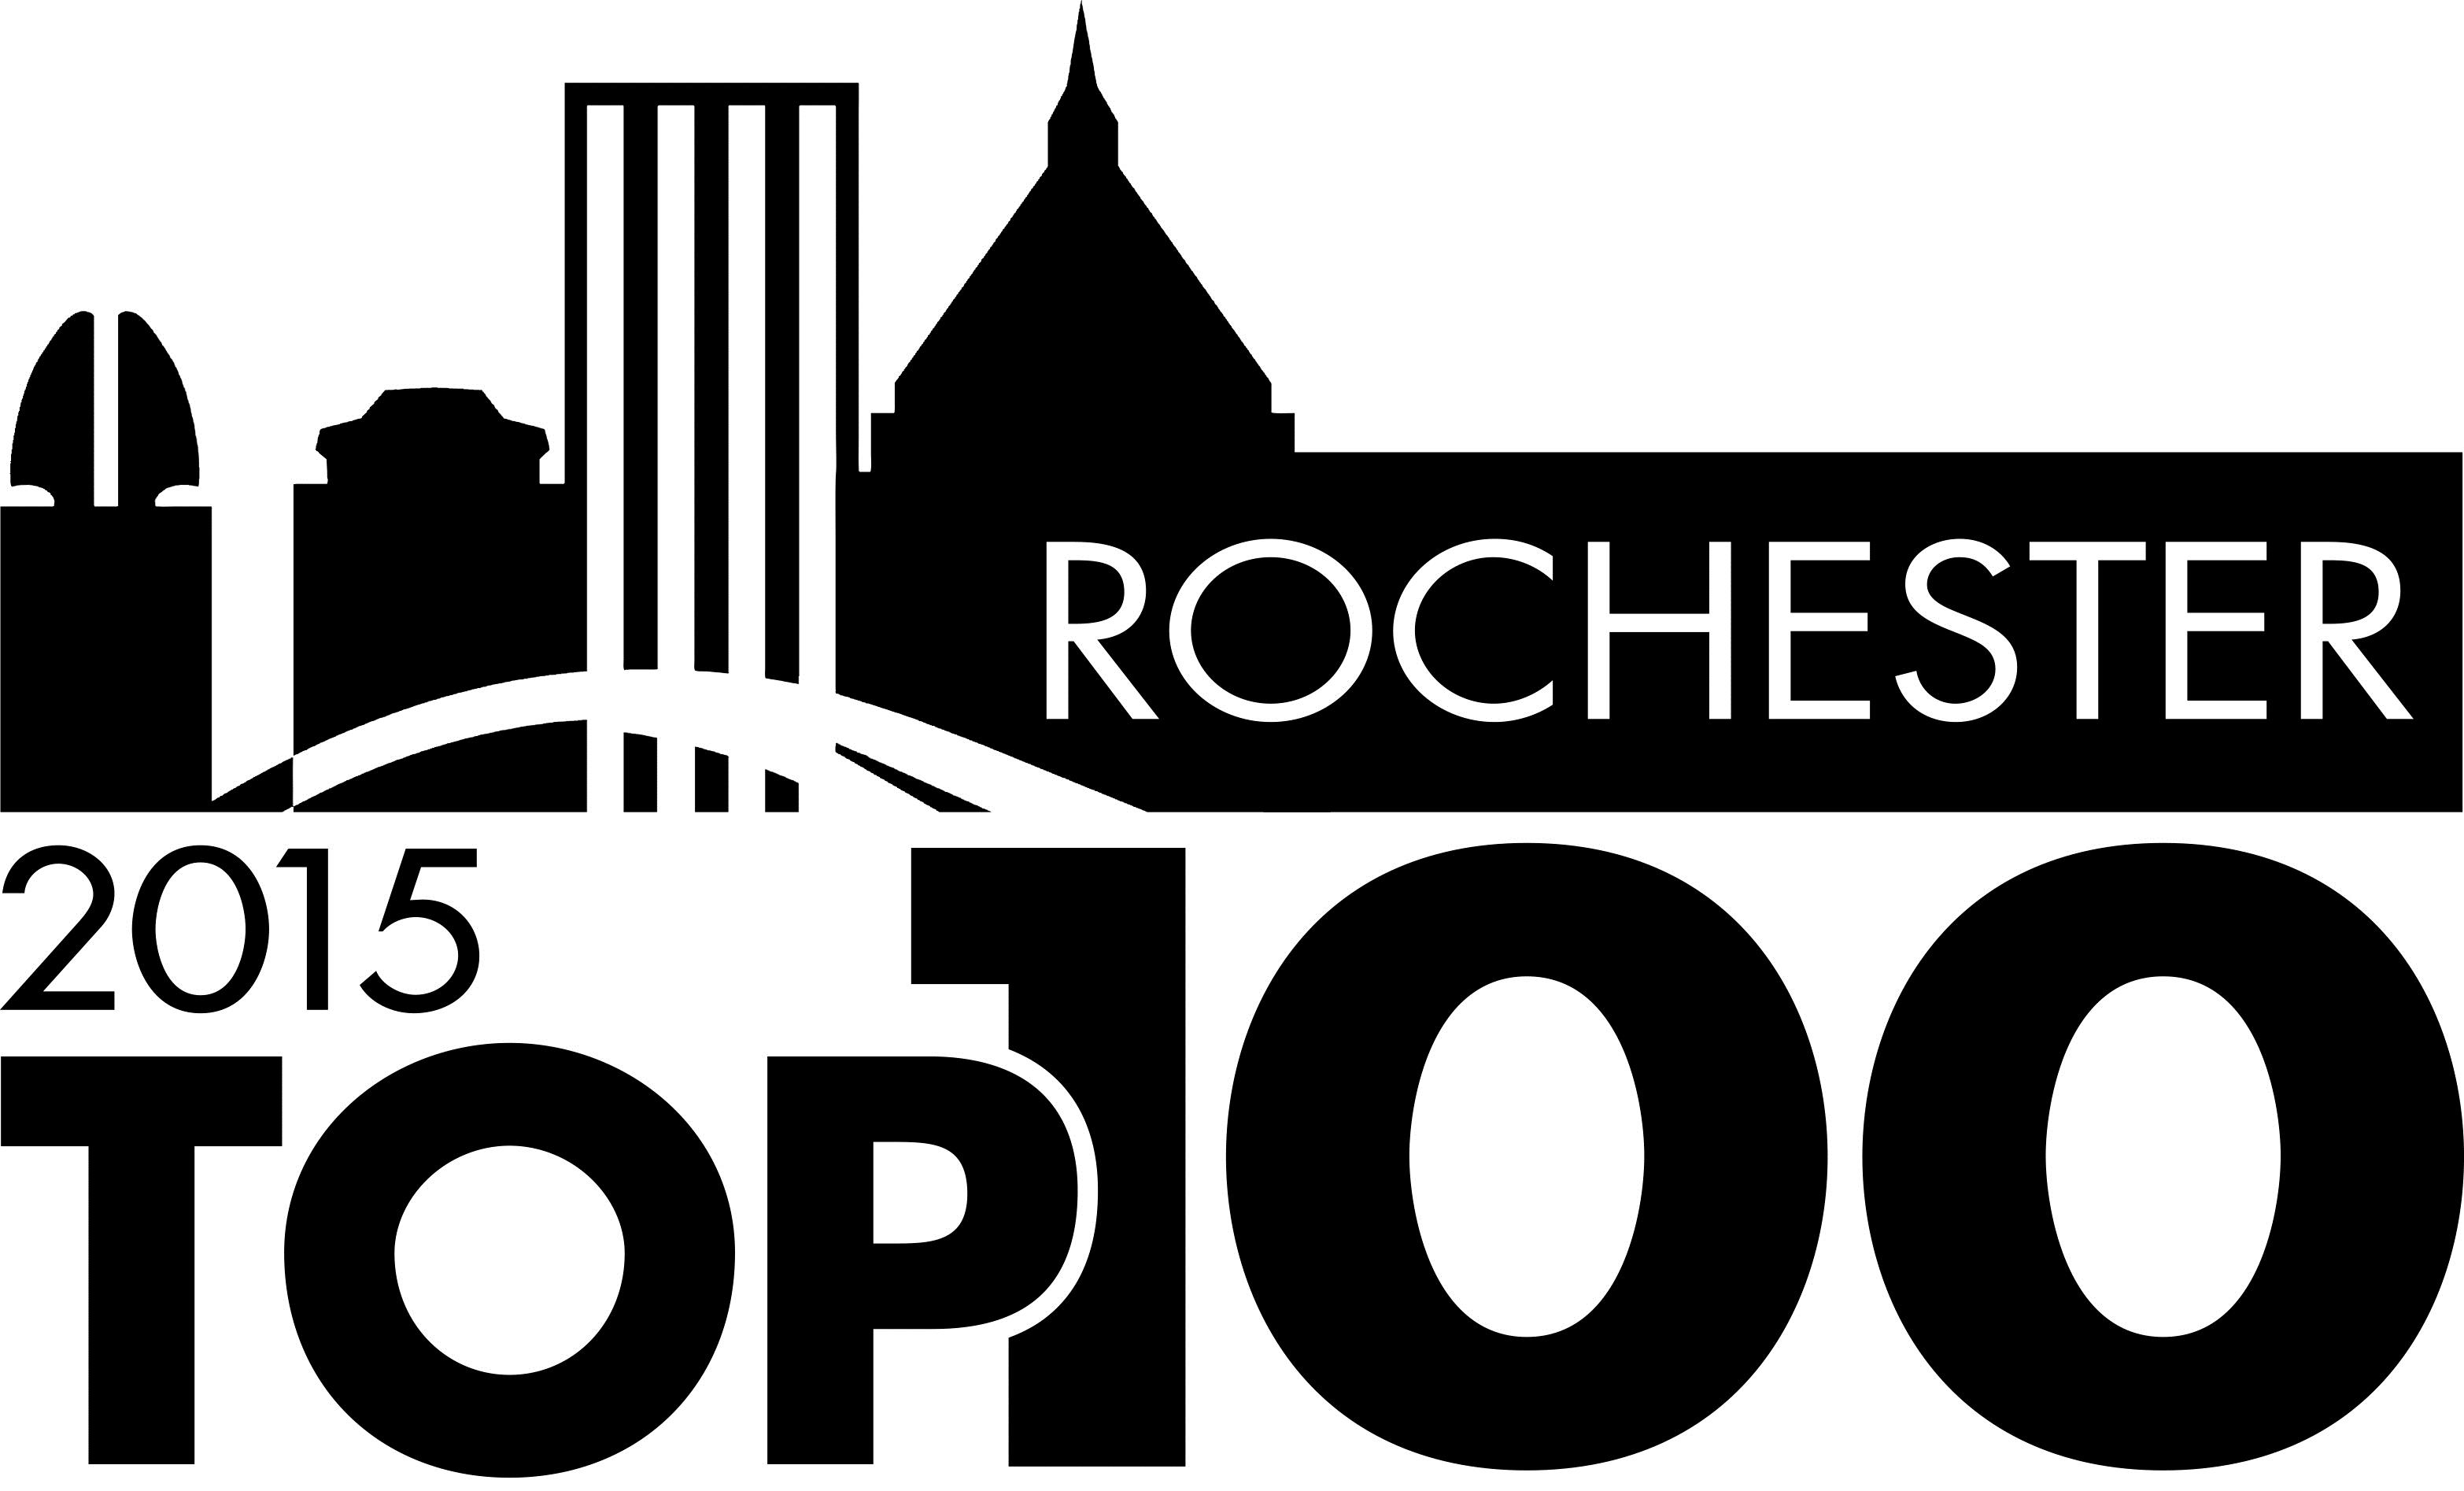 D4 Honored Again as One of Rochester's Top 100